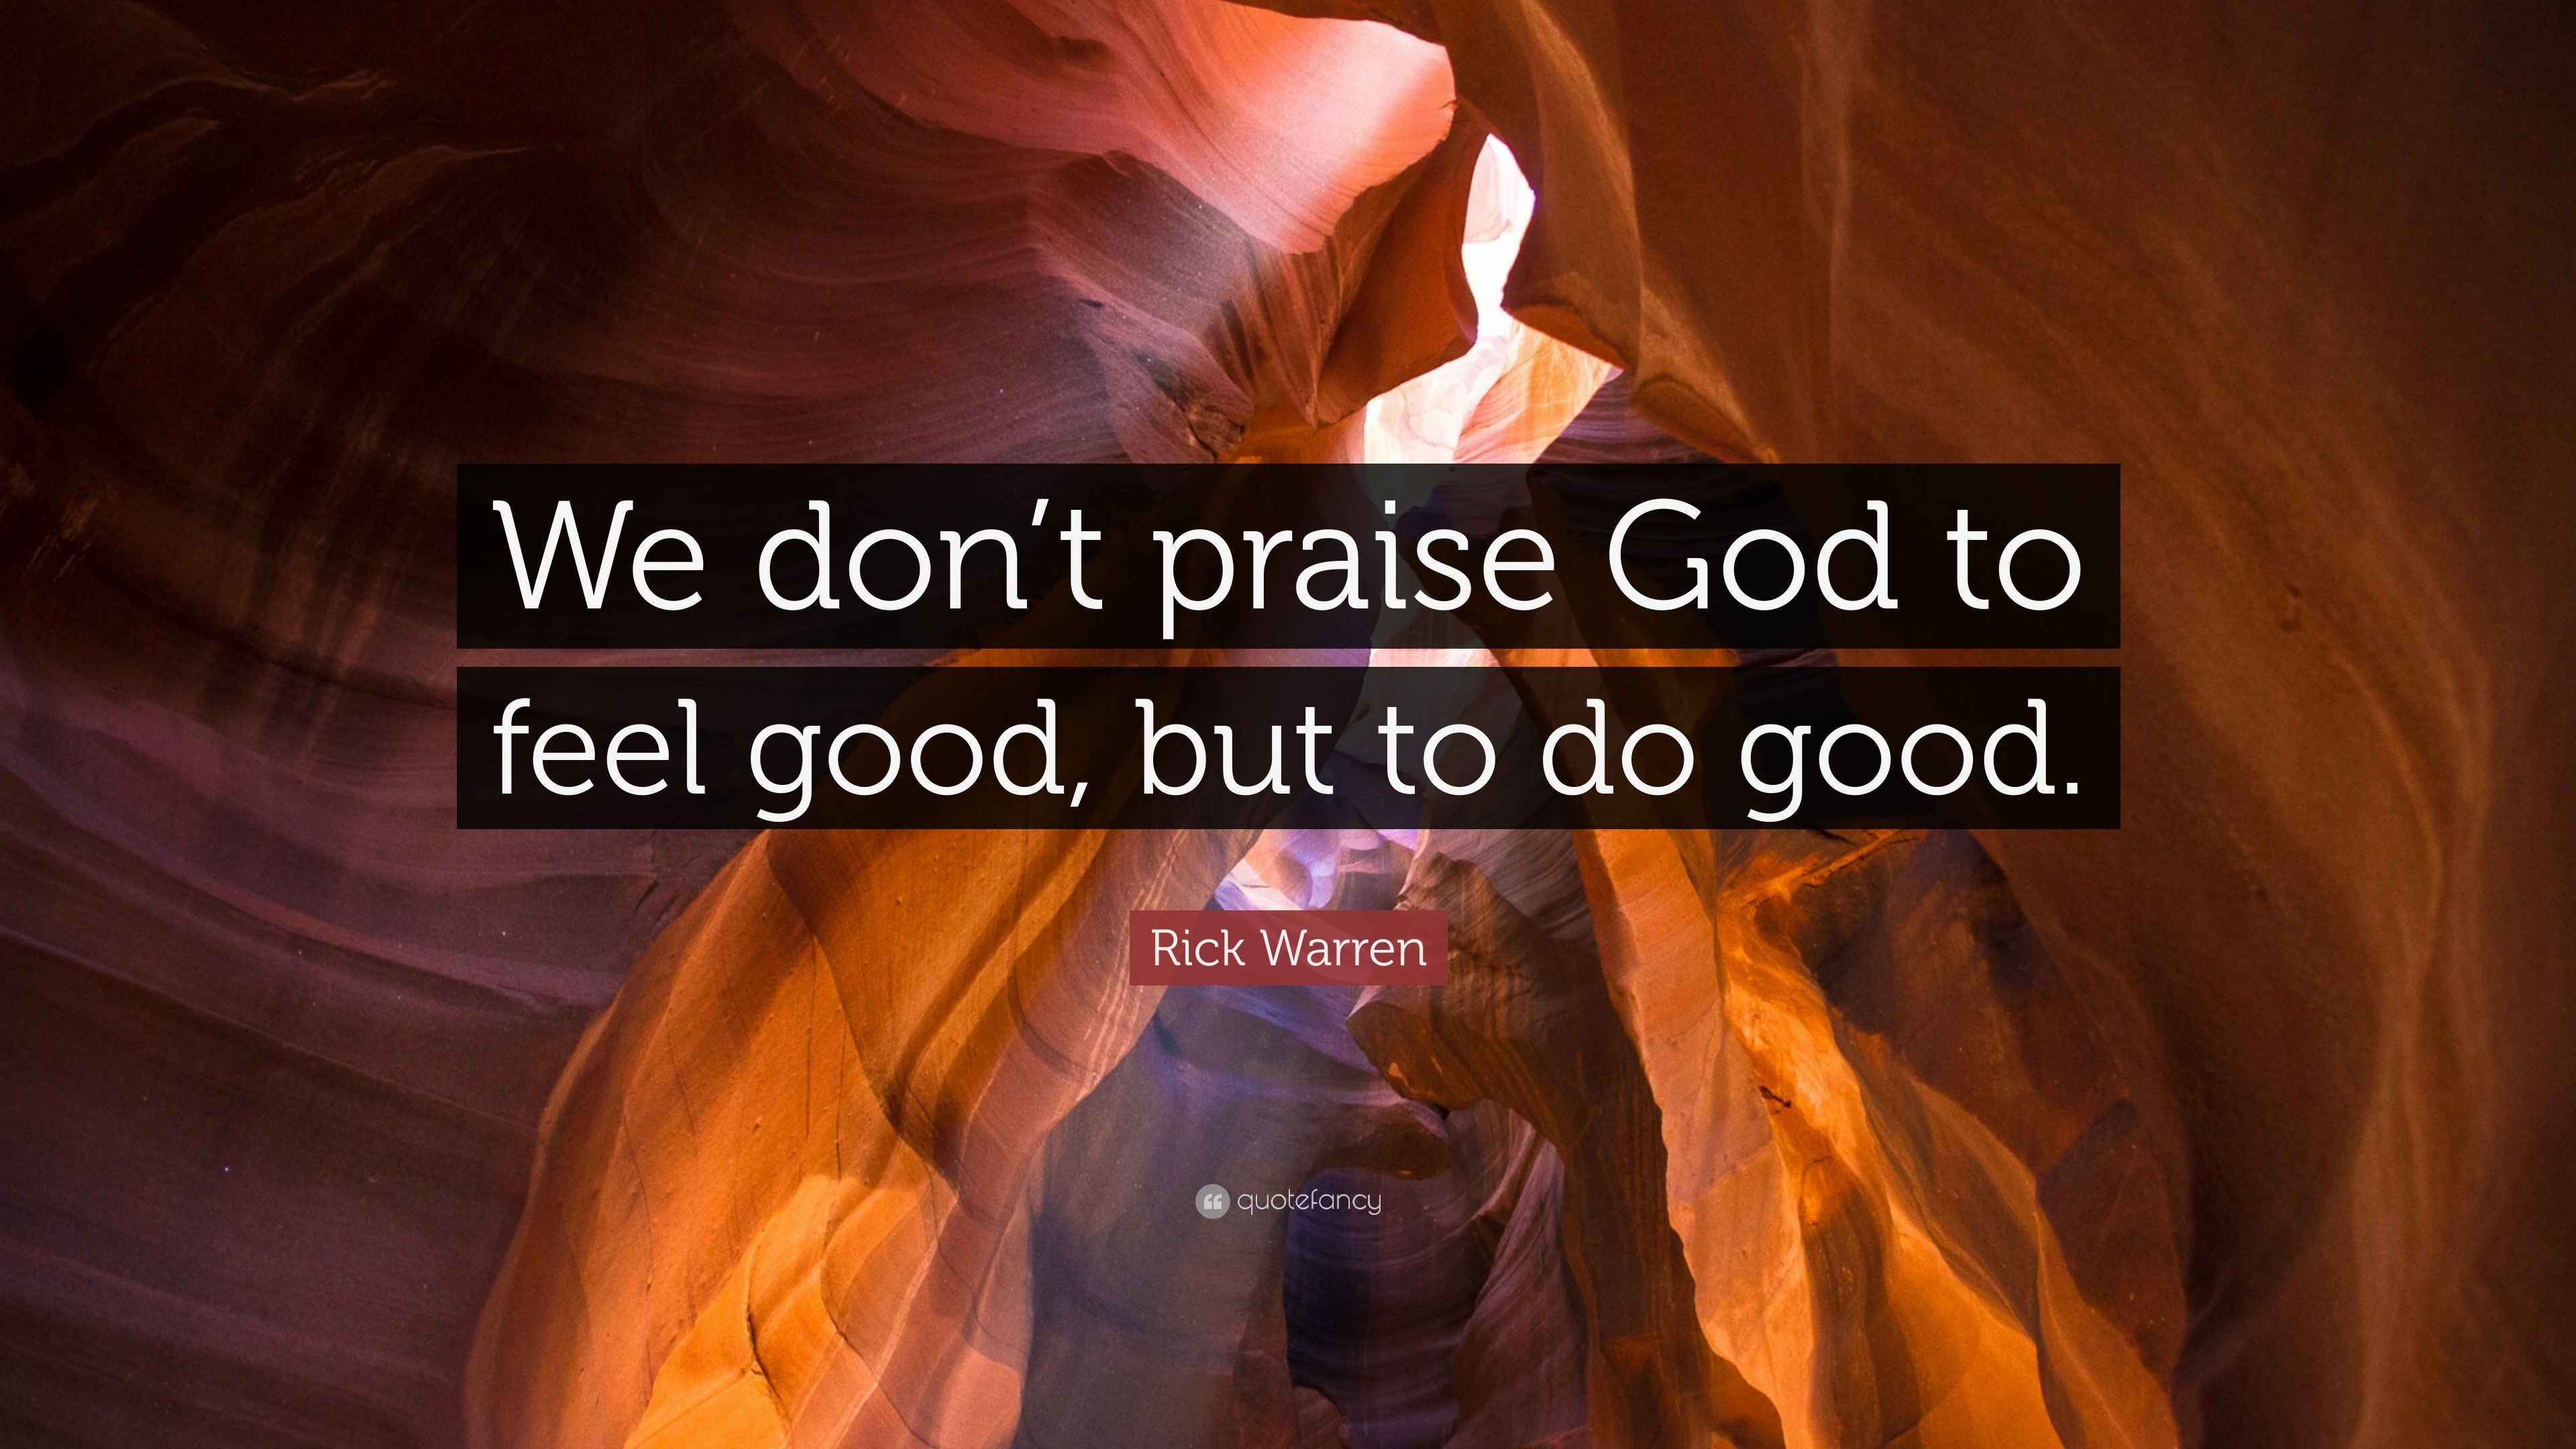 Rick Warren Quote: “We don't praise God to feel good, but to do good.”